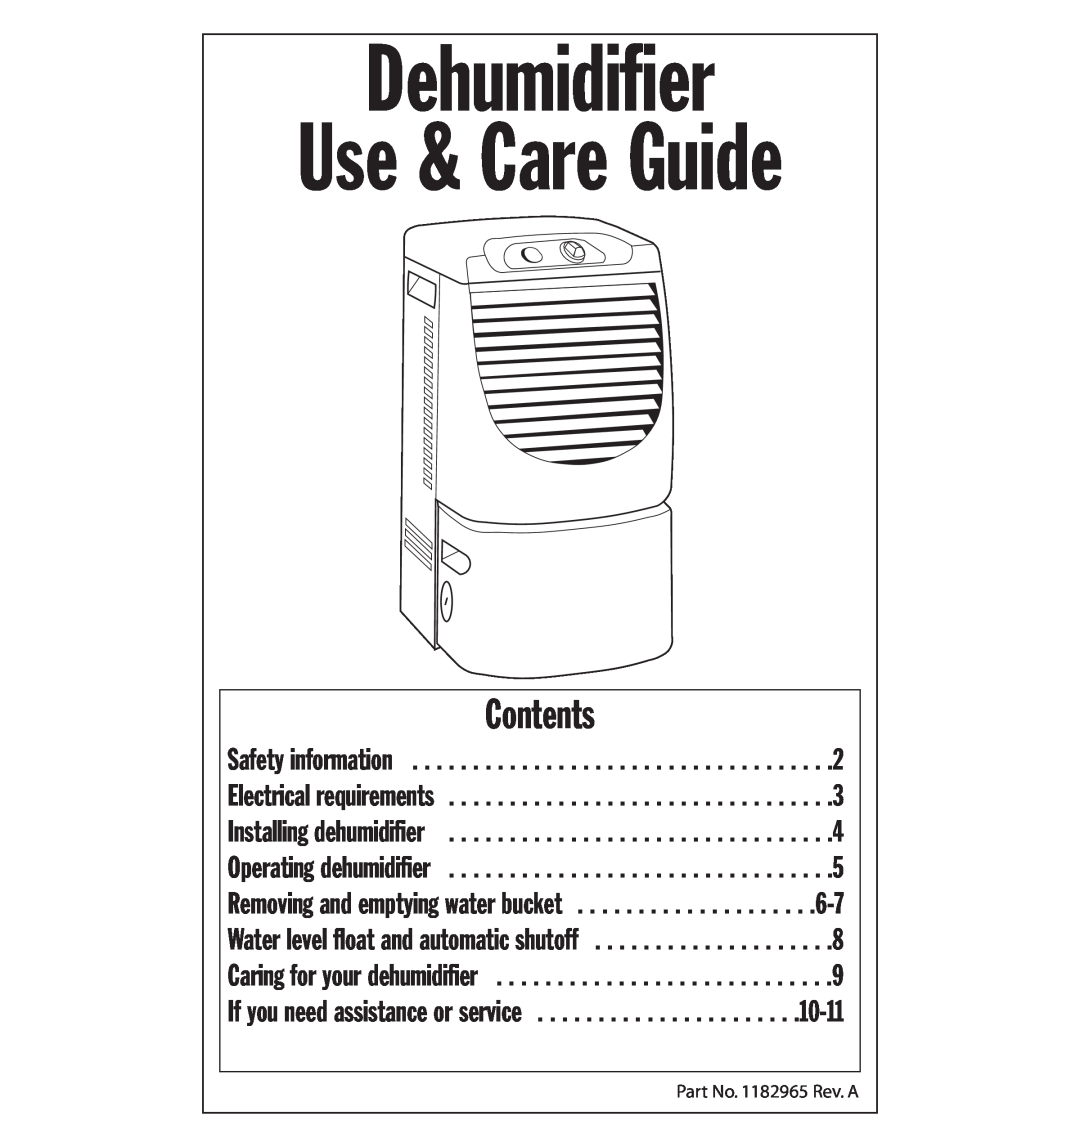 Whirlpool AD25BBK0 manual Contents, Dehumidifier Use & Care Guide 